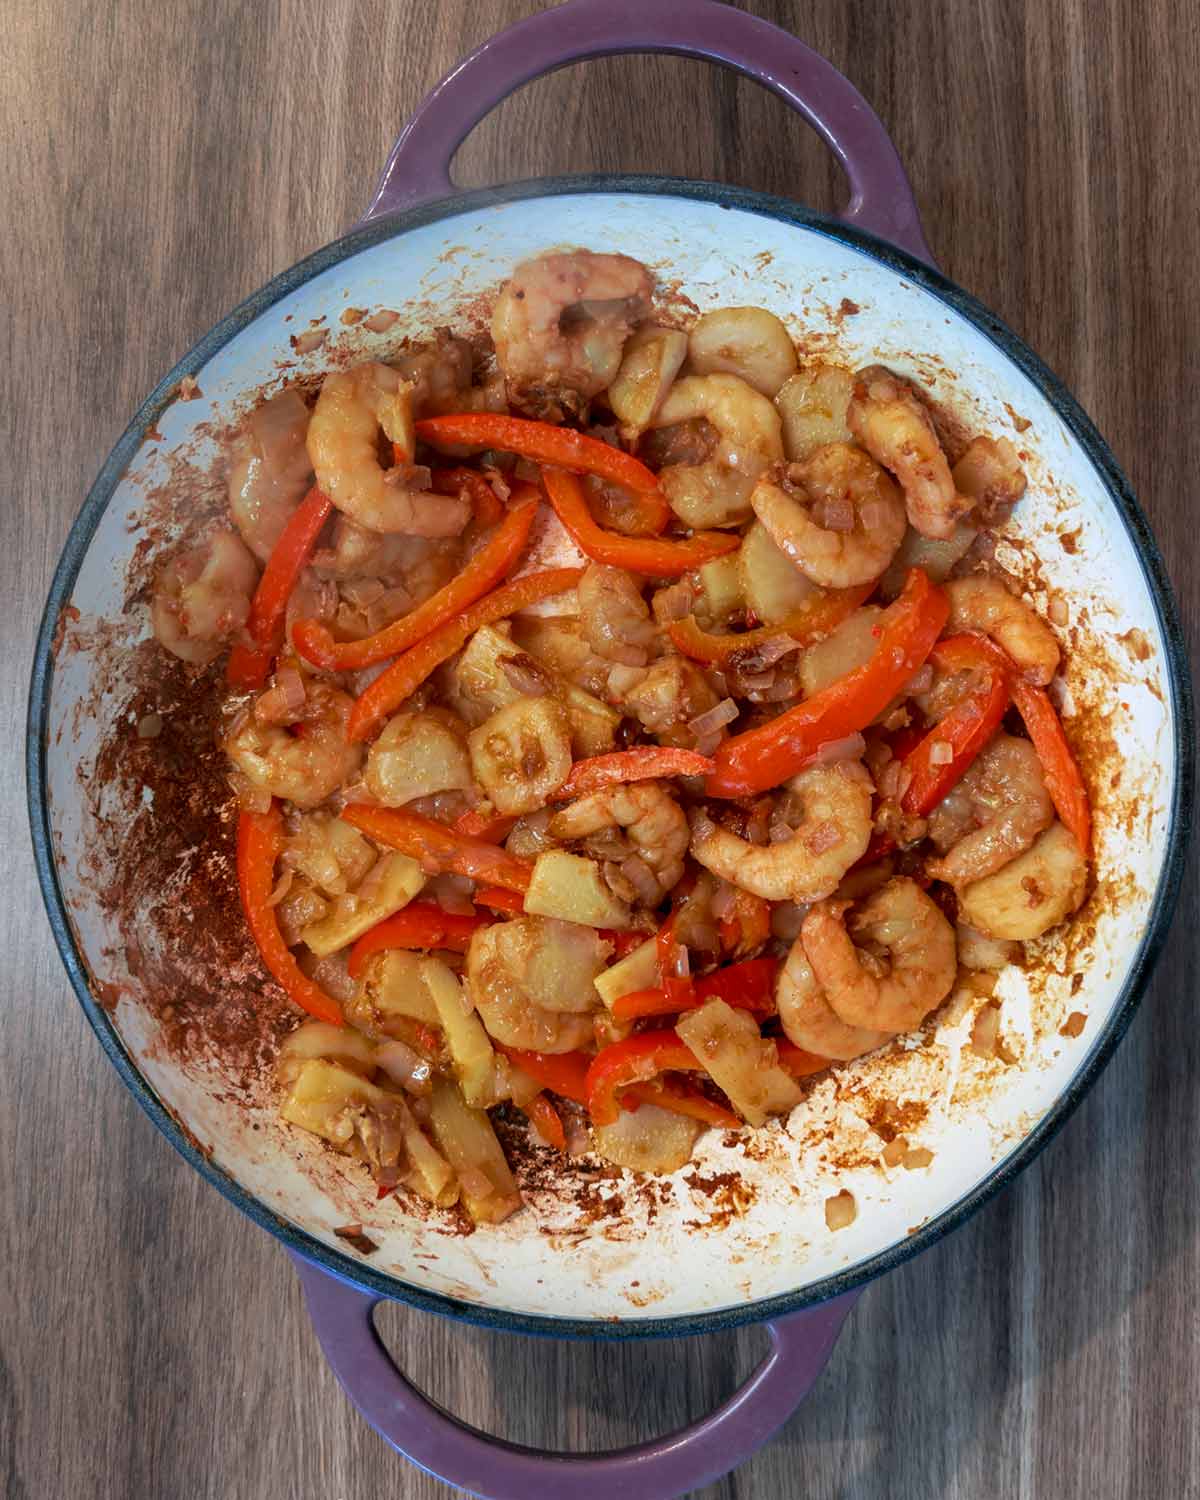 cooked prawns and vegetables in the pan.